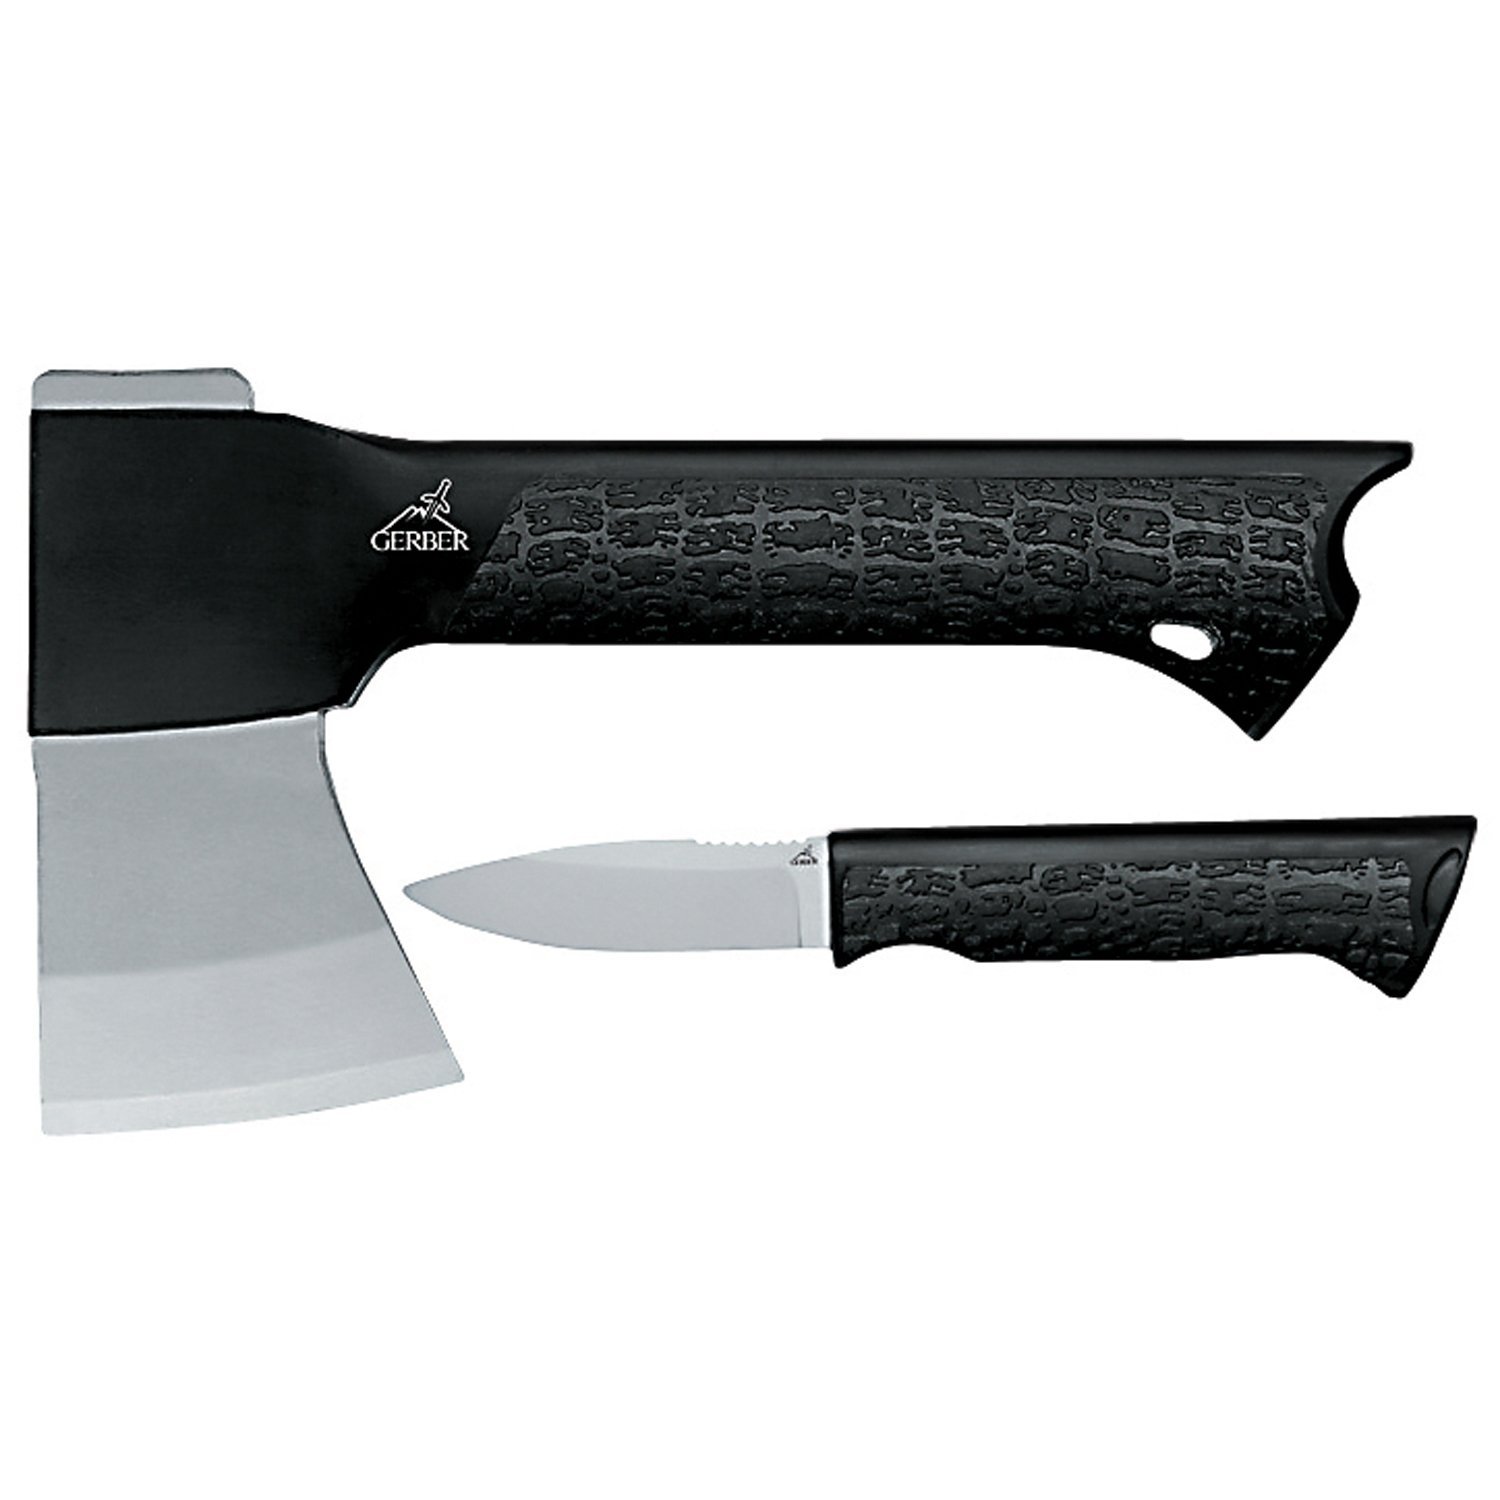 Amazon.com : Gerber 31-001054 Gator Axe with Knife (Clam Pack ...